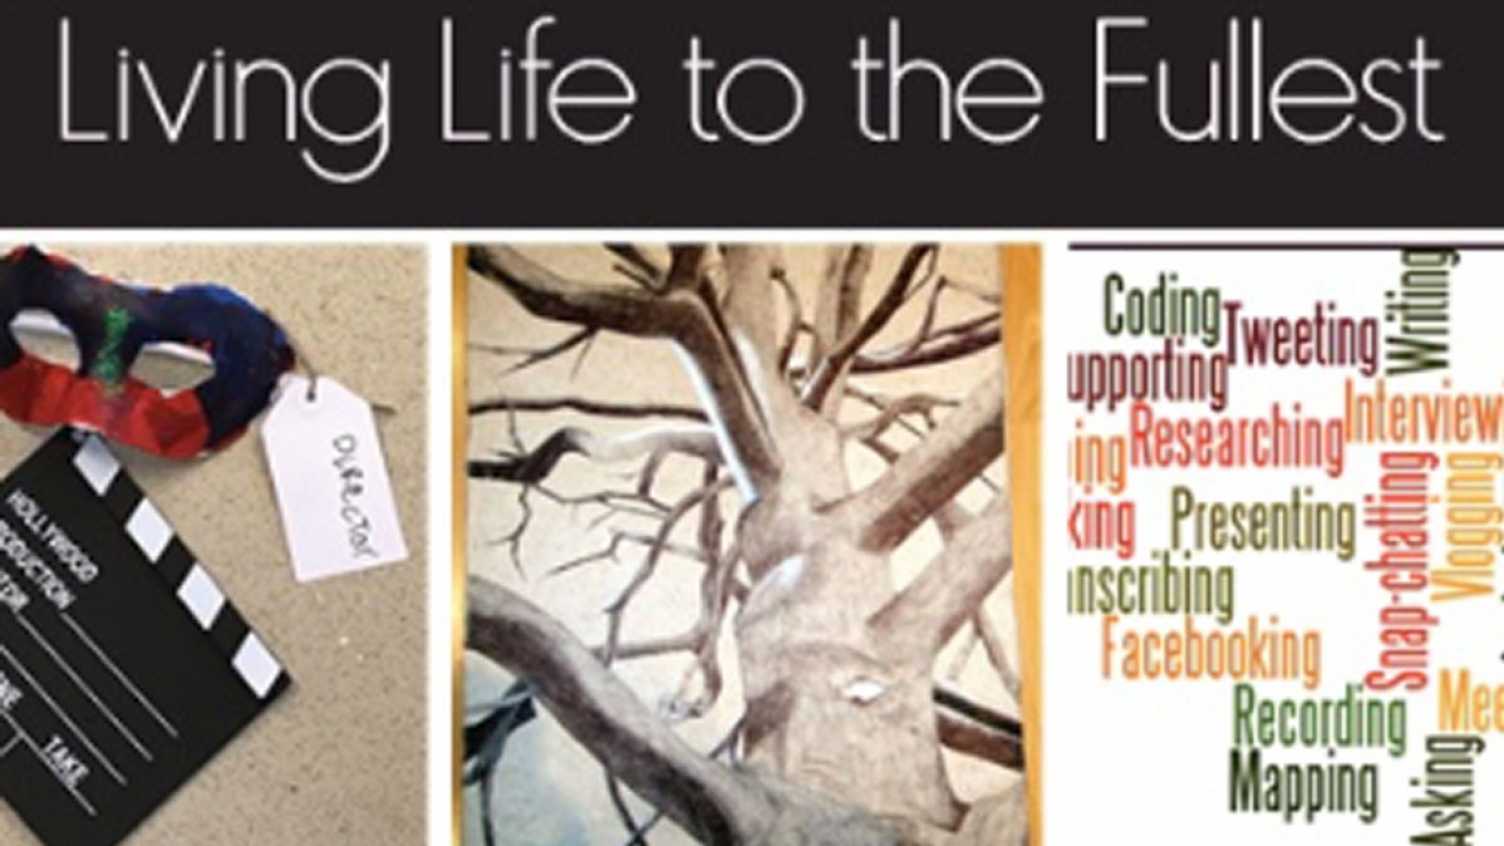 Thumbnail for Living life to the fullest | iHuman